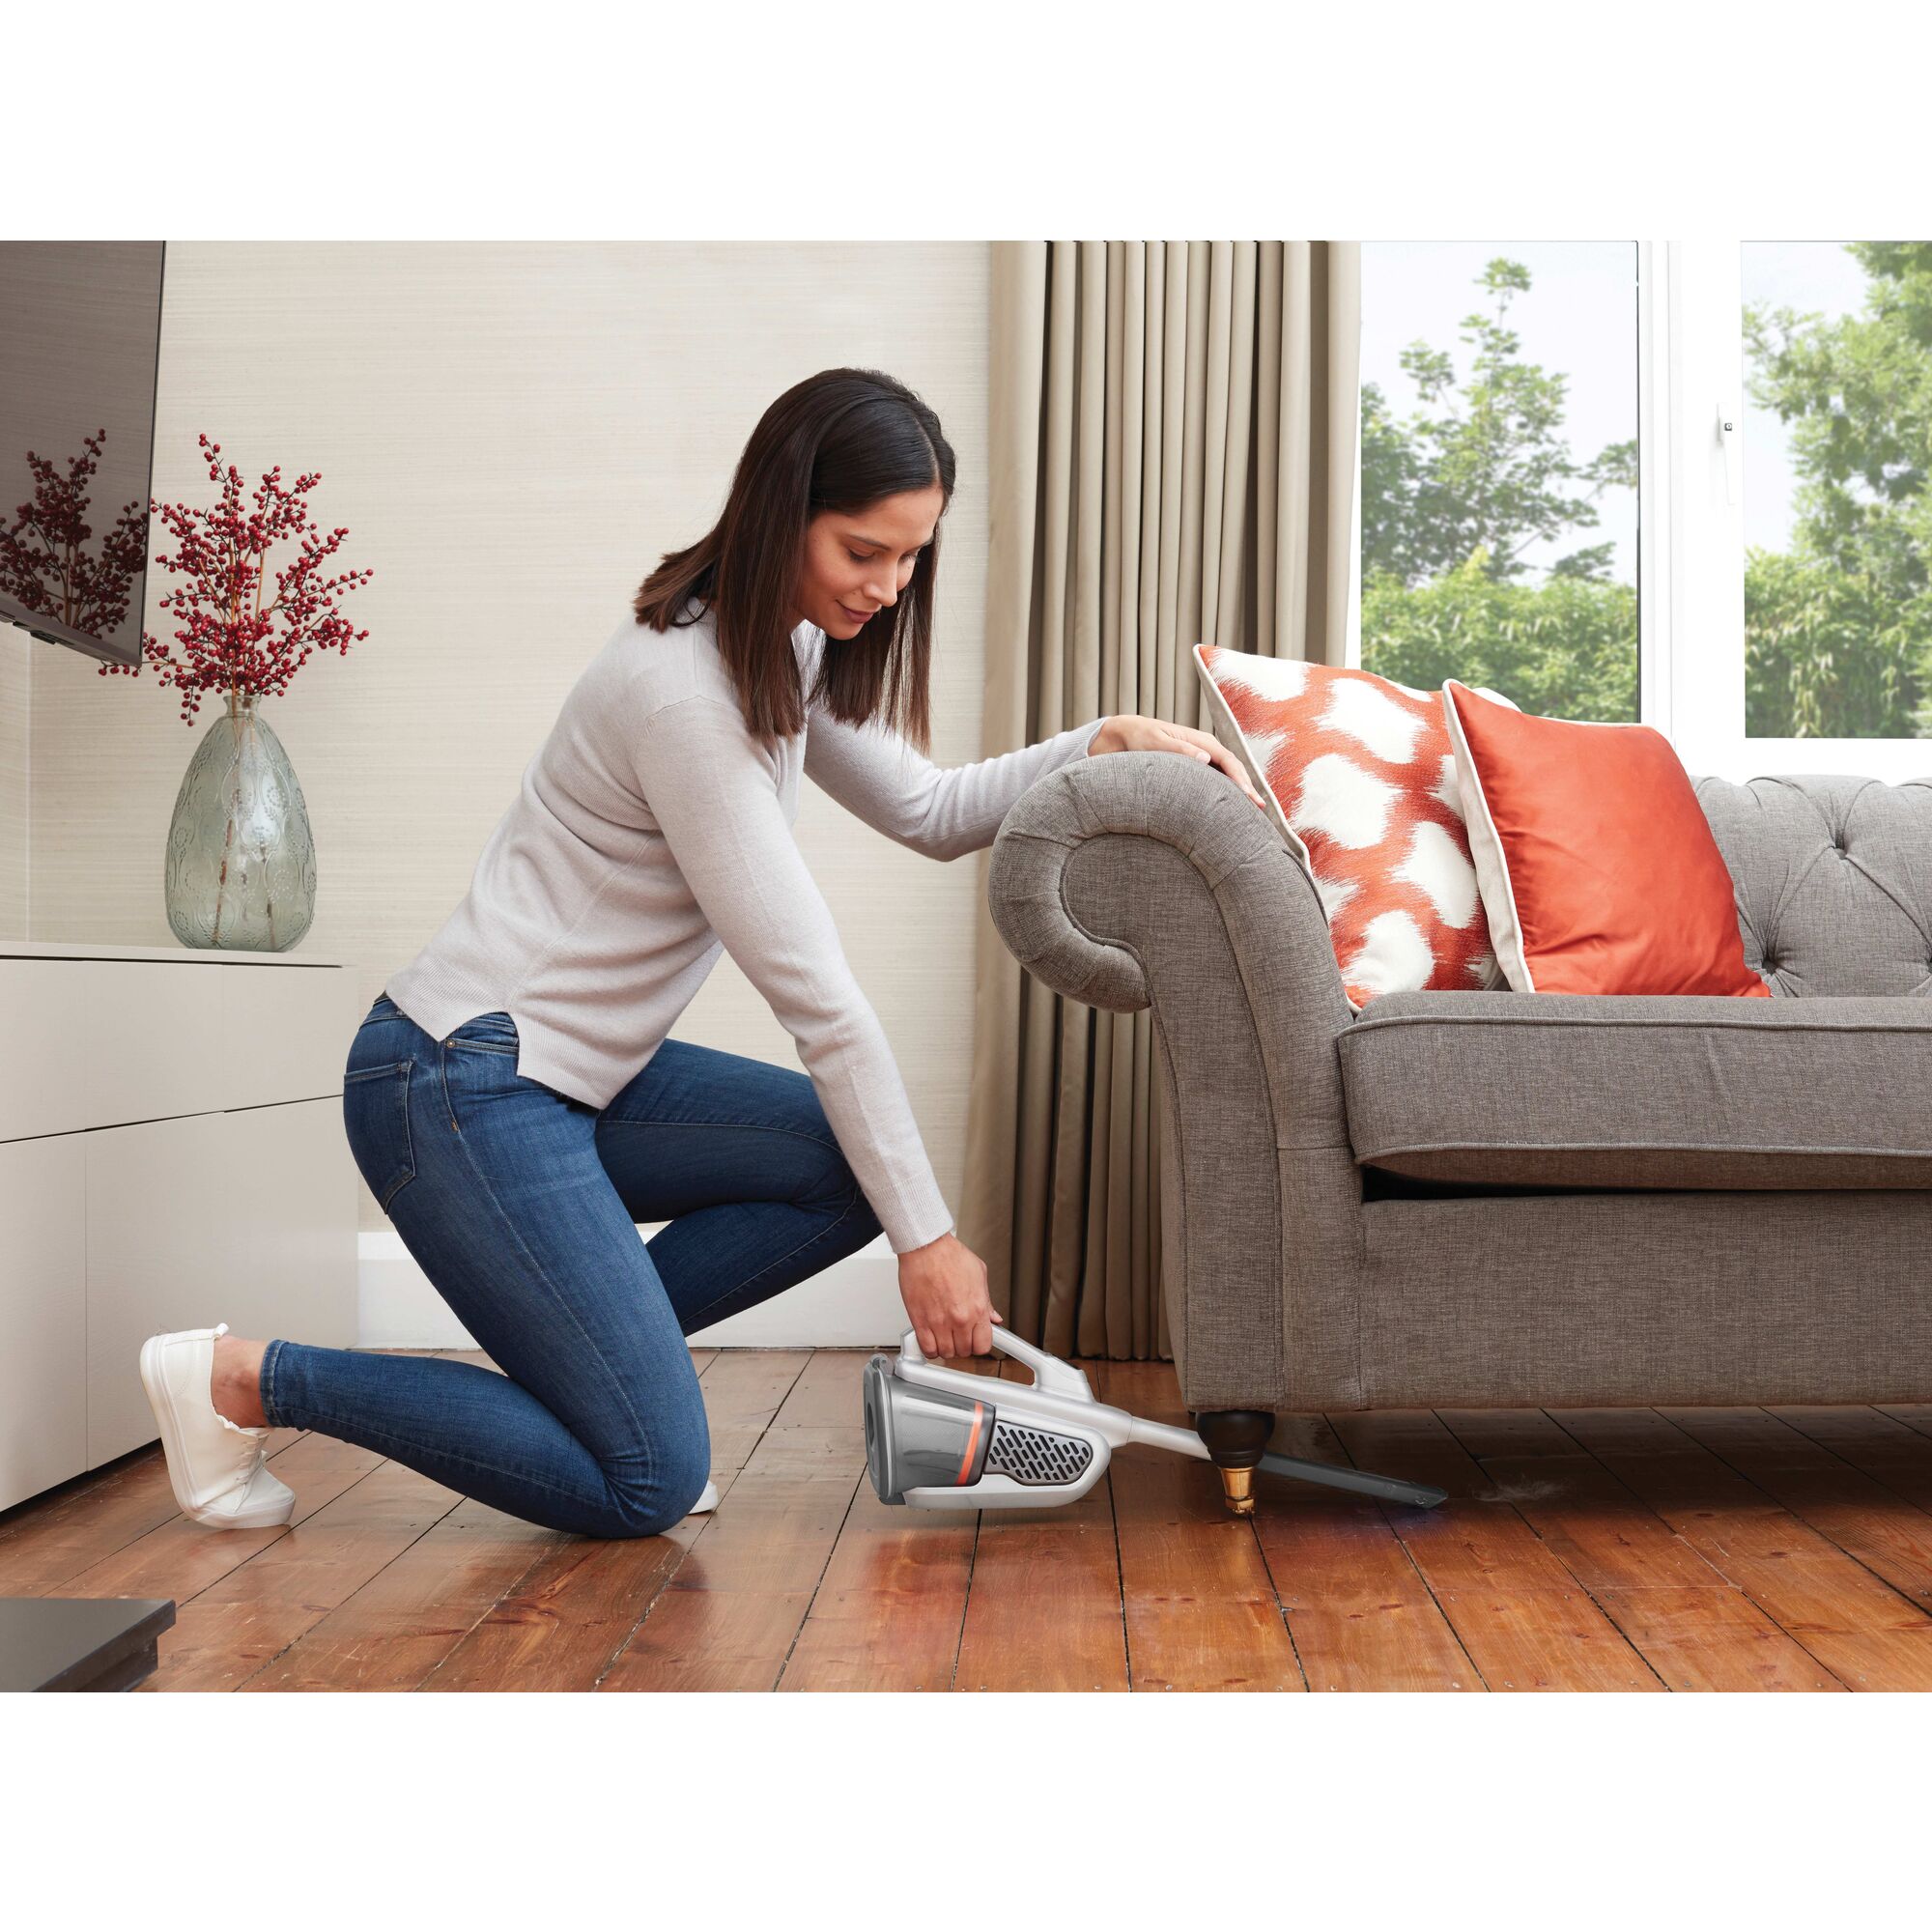 A shopper-loved Dustbuster handheld vacuum is on sale at  - TheStreet